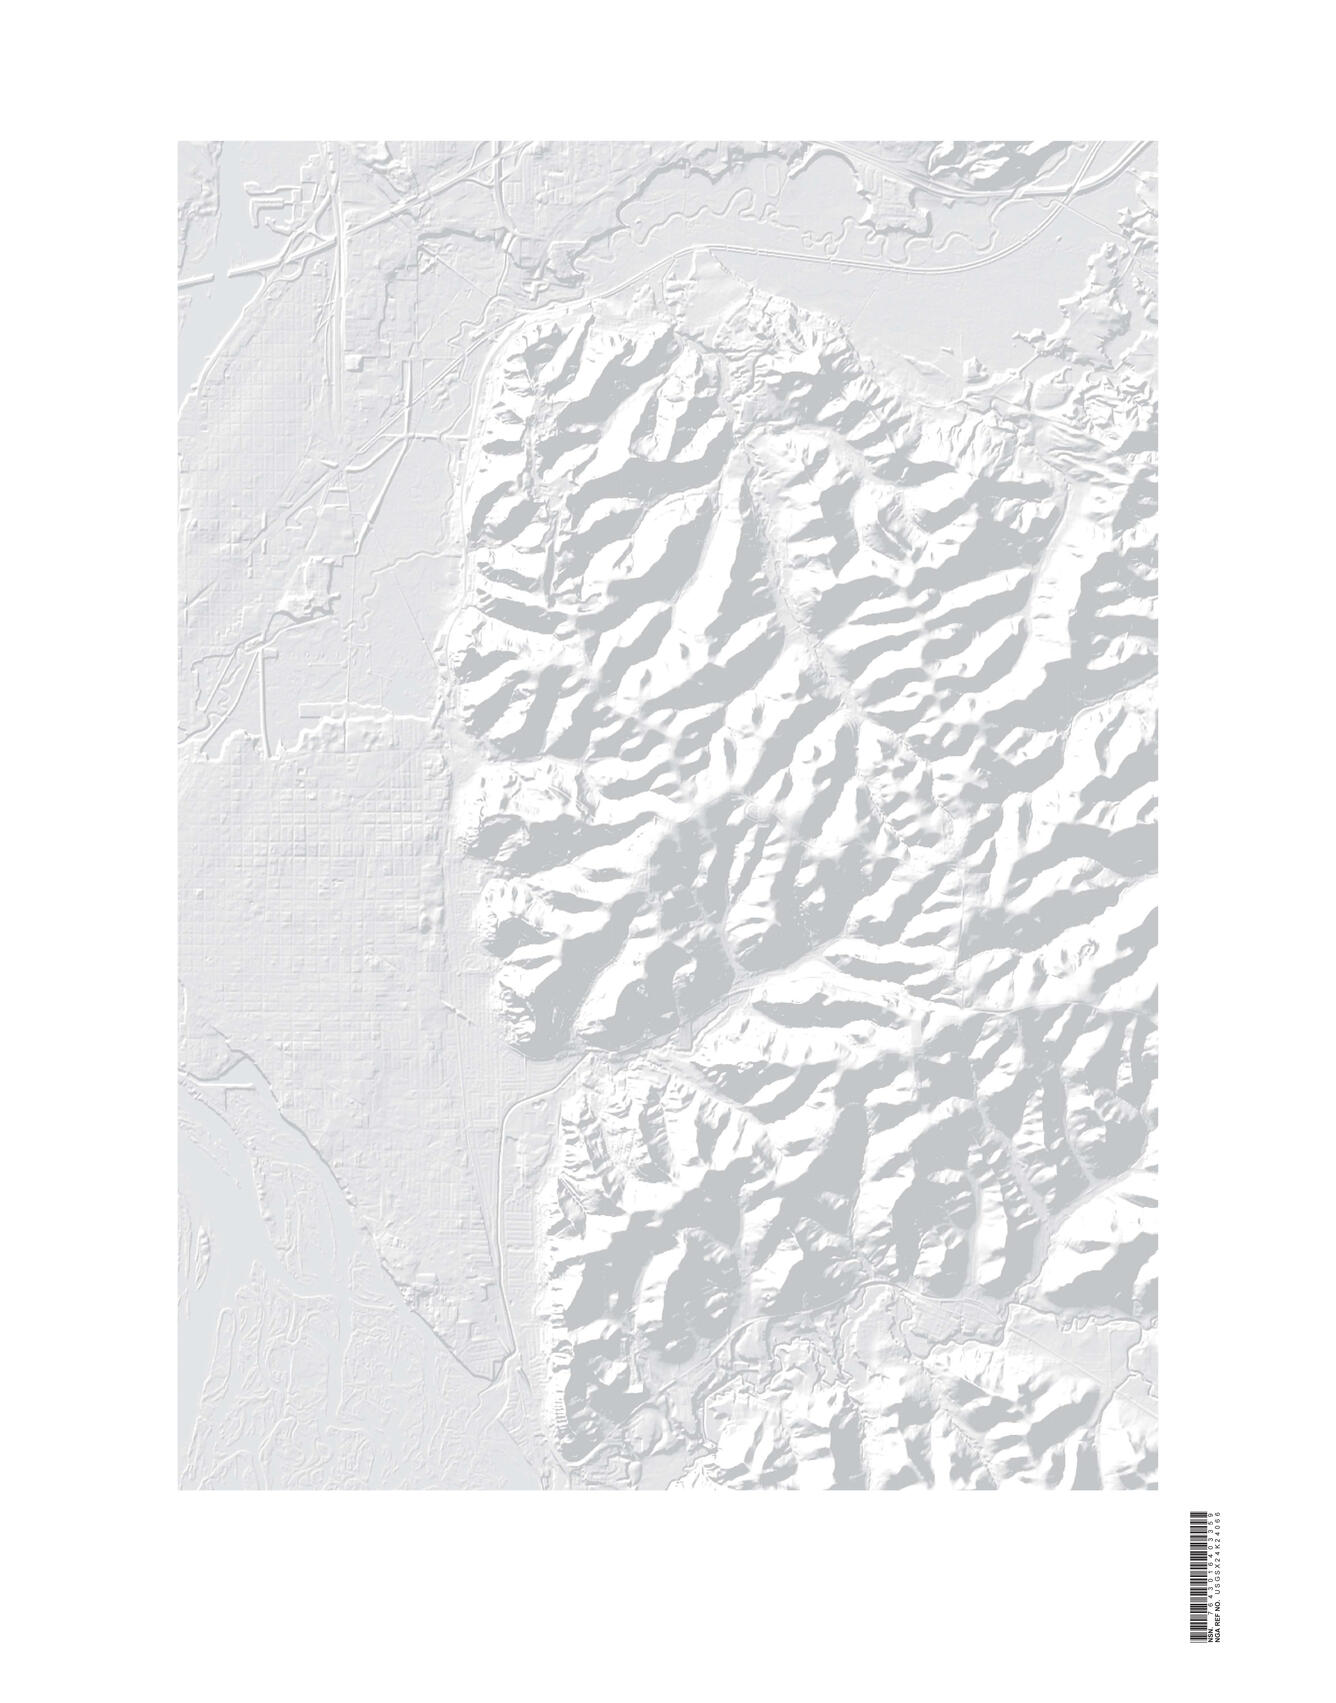 WI LaCrosse Shaded Relief US Topo (Browse Image for Story Map)